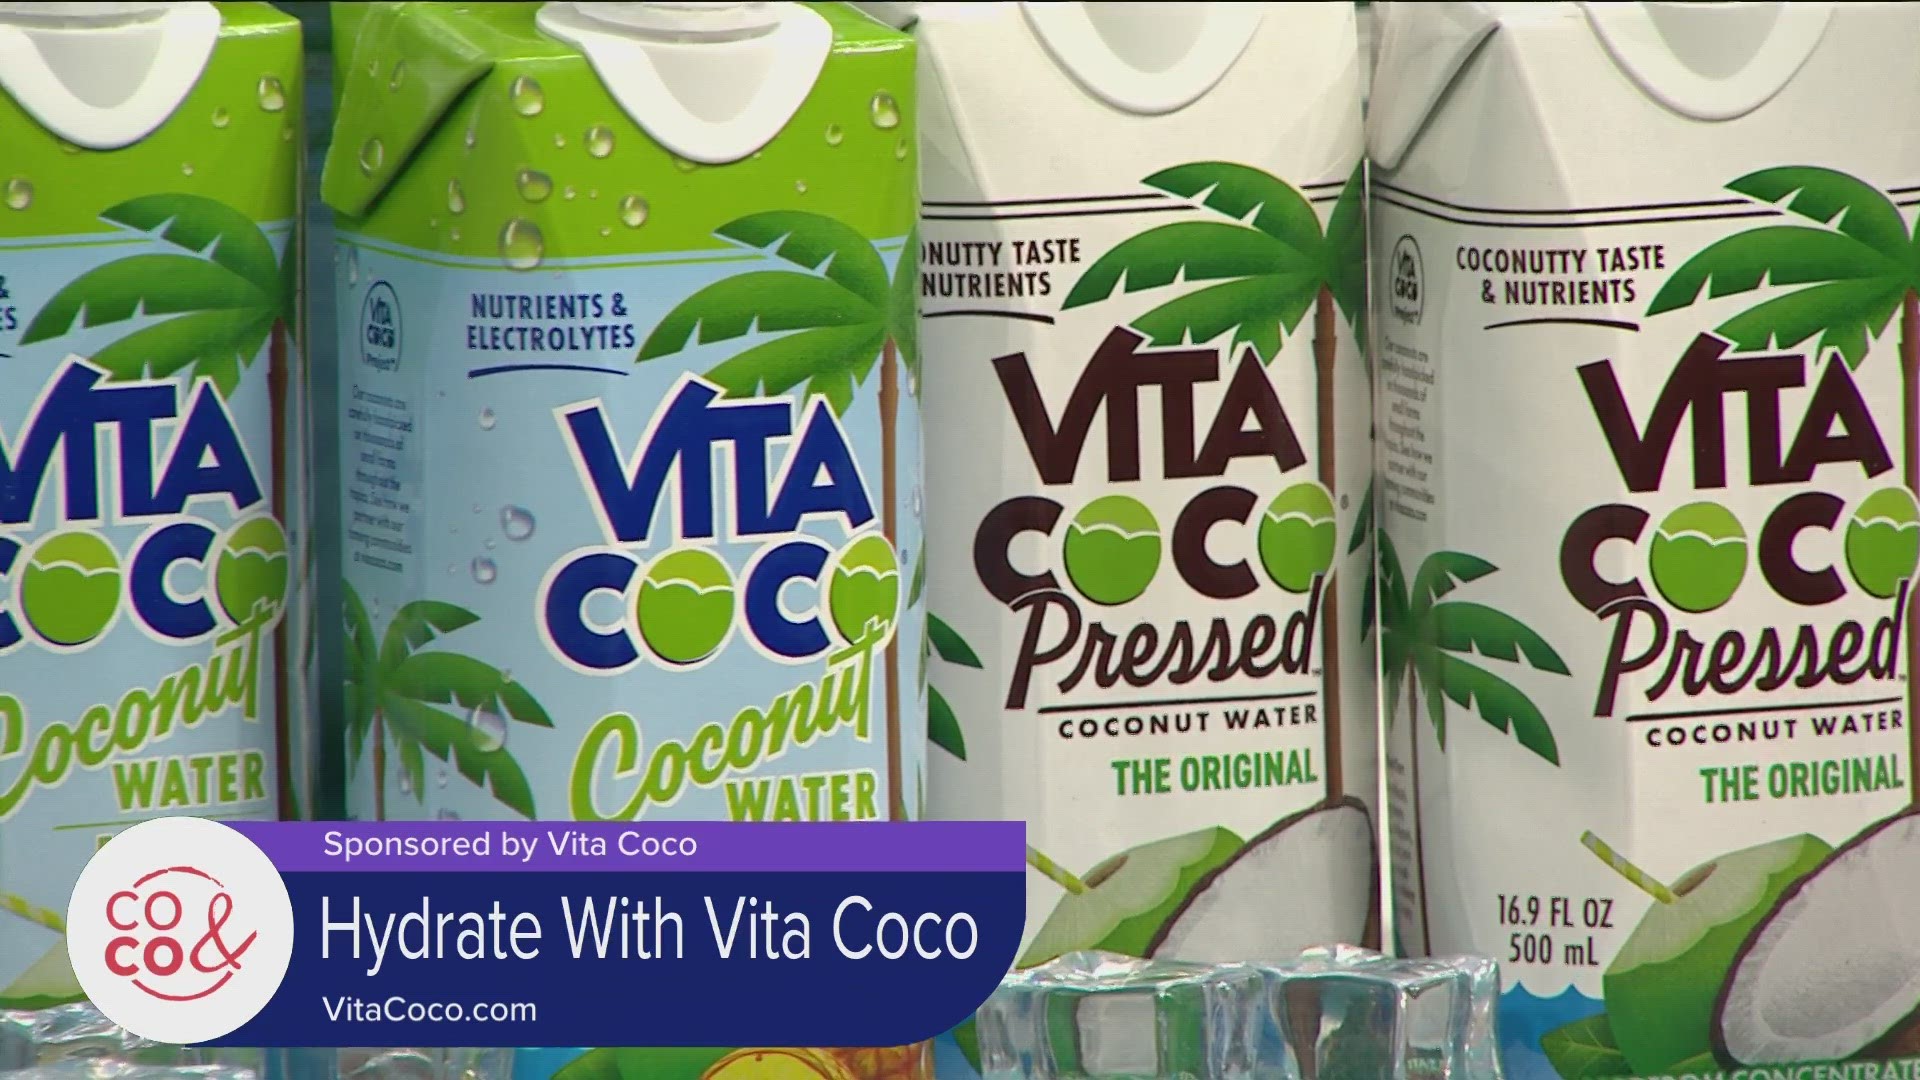 Visit VitaCoco.com to learn more and for some great recipes using Vita Coco Coconut Water! **PAID CONTENT**